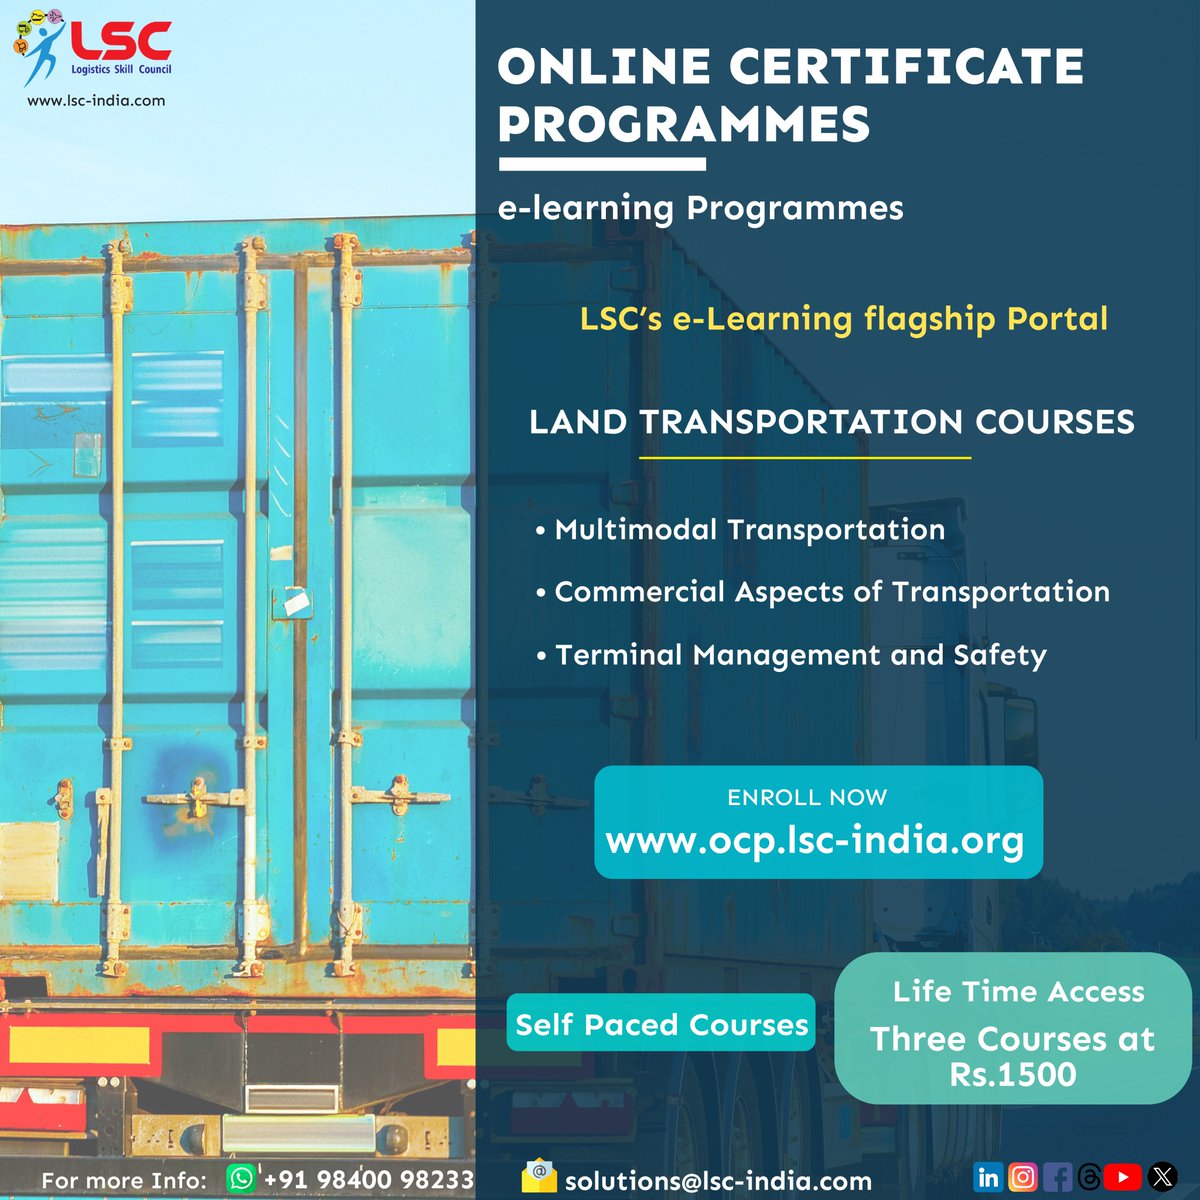 Logistics Sector Skill Council (LSC) of India is offering a new series of online certificate programs in Land Transportation.🚛📈

For more info, visit ocp.lsc-india.org

#lsc #logistics #onlinecertification #ocp #landtransport #elearning #skilling #upskilling #learning